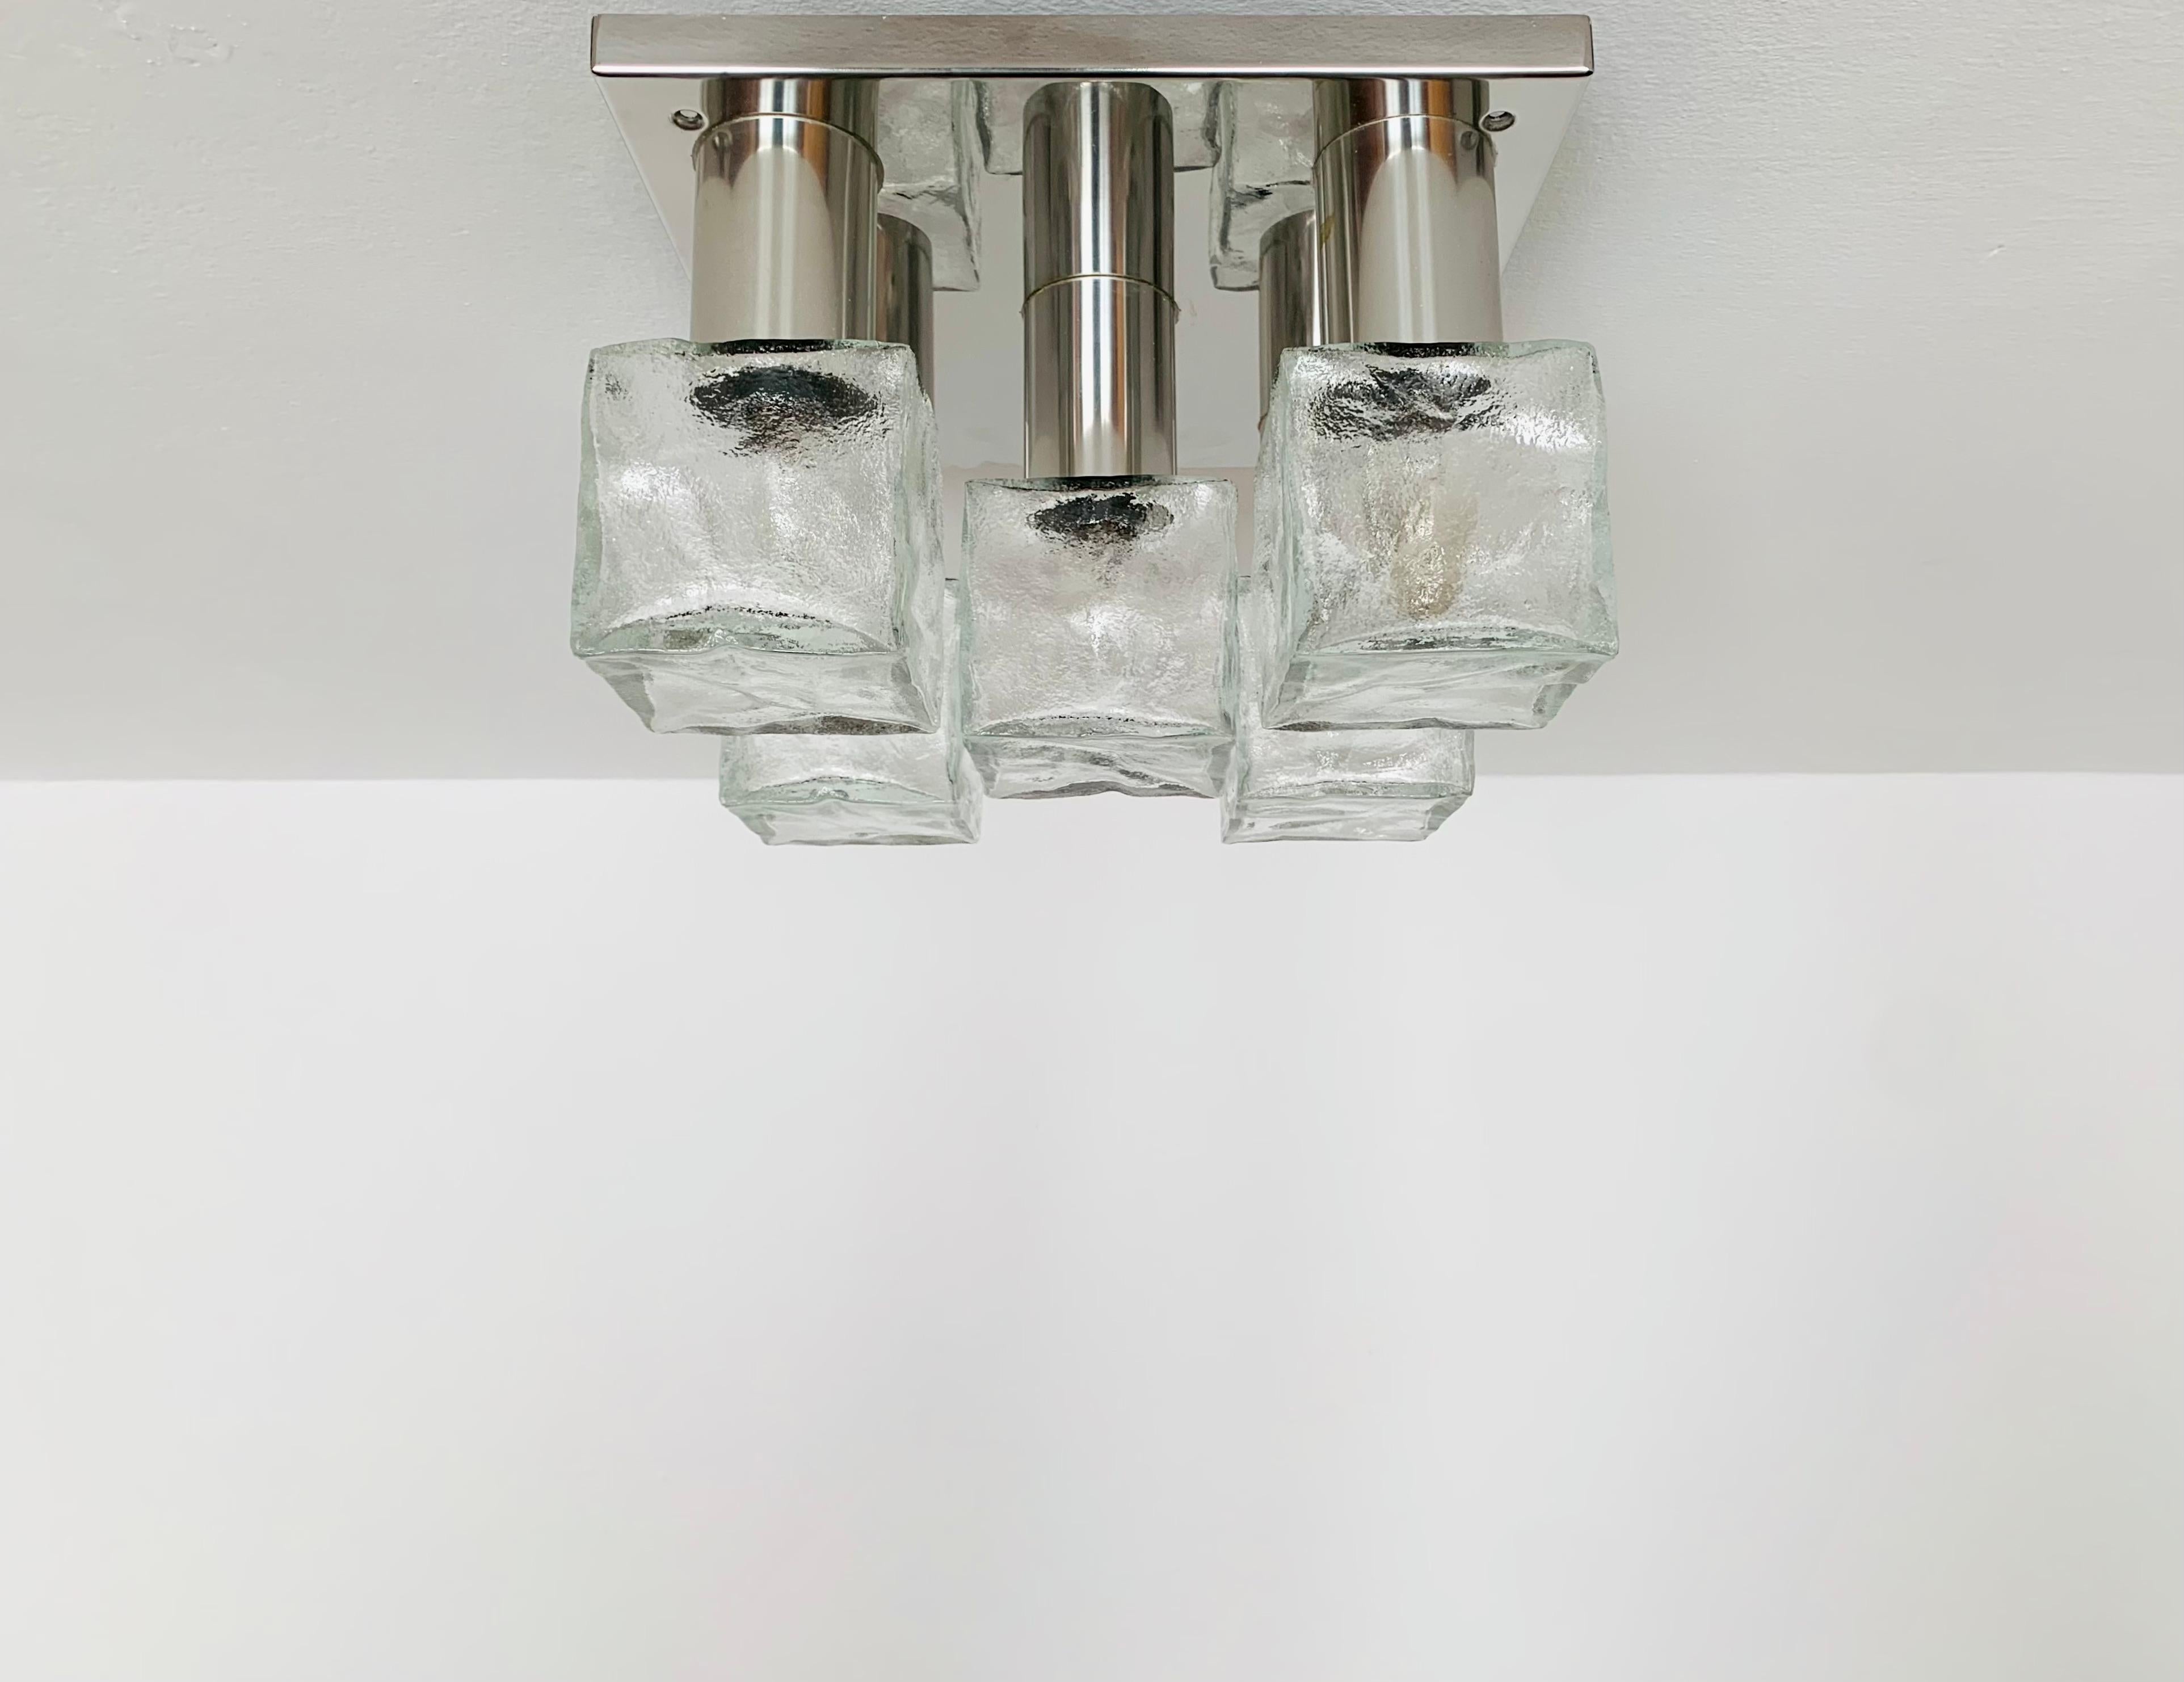 Wonderful ice glass ceiling lamp from the 1960s.
The beautifully formed Murano glass elements create an impressive, sparkling play of light.
Very high-quality workmanship and a real eye-catcher for every home.

Design: J.T. Kalmar
Manufacturer: